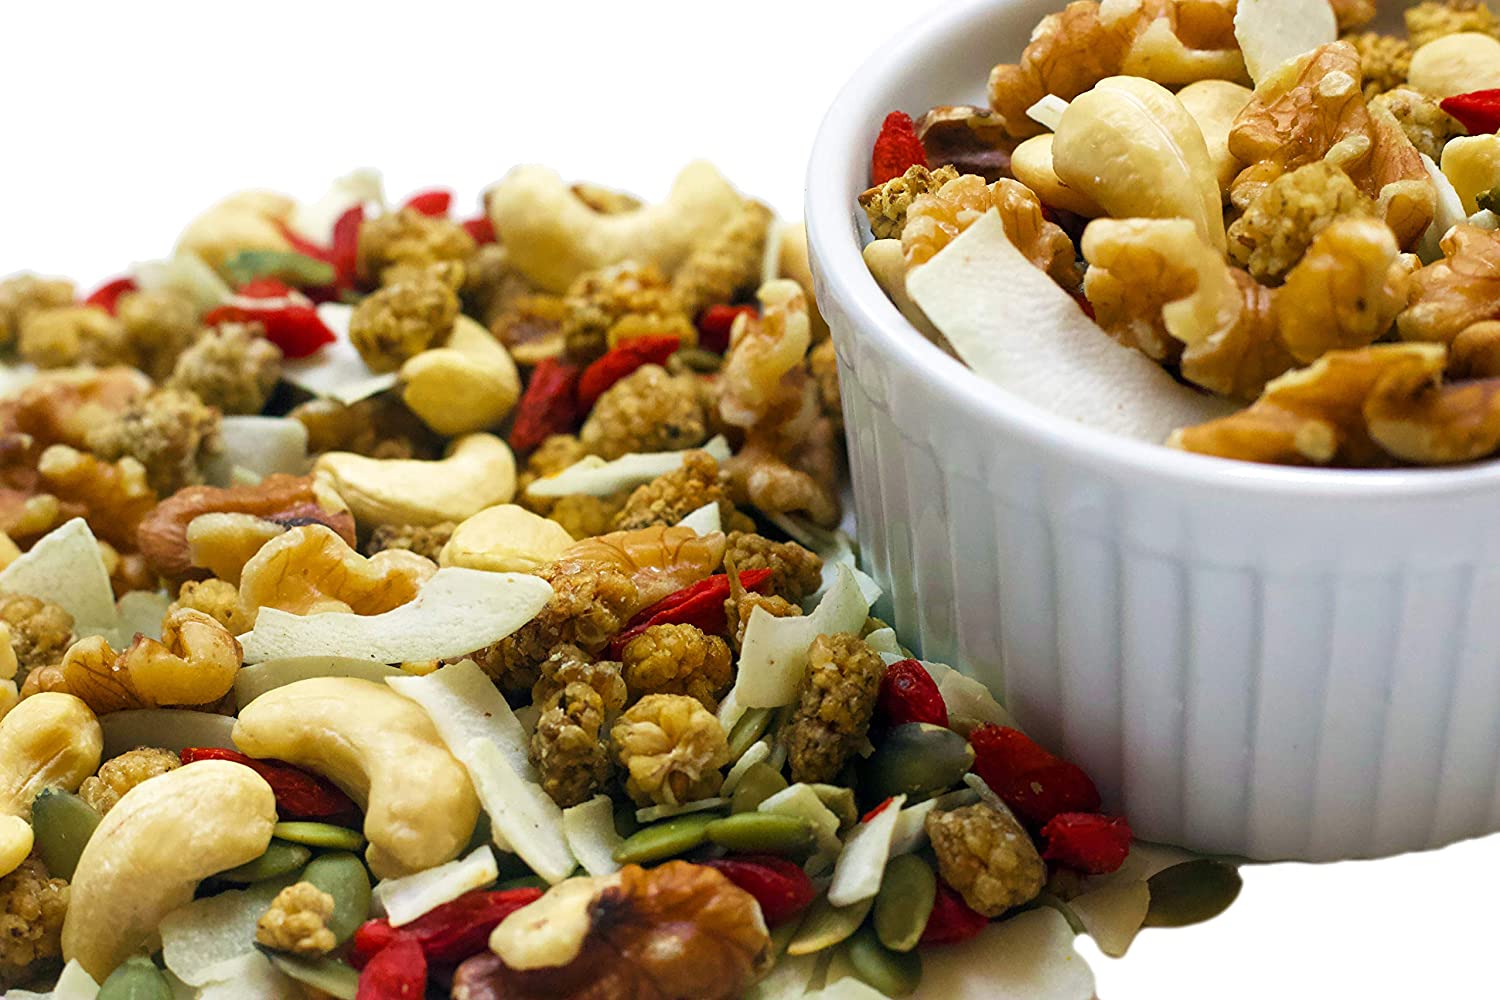 Raw Superfoods Trail Mix - Tropical Power Blend